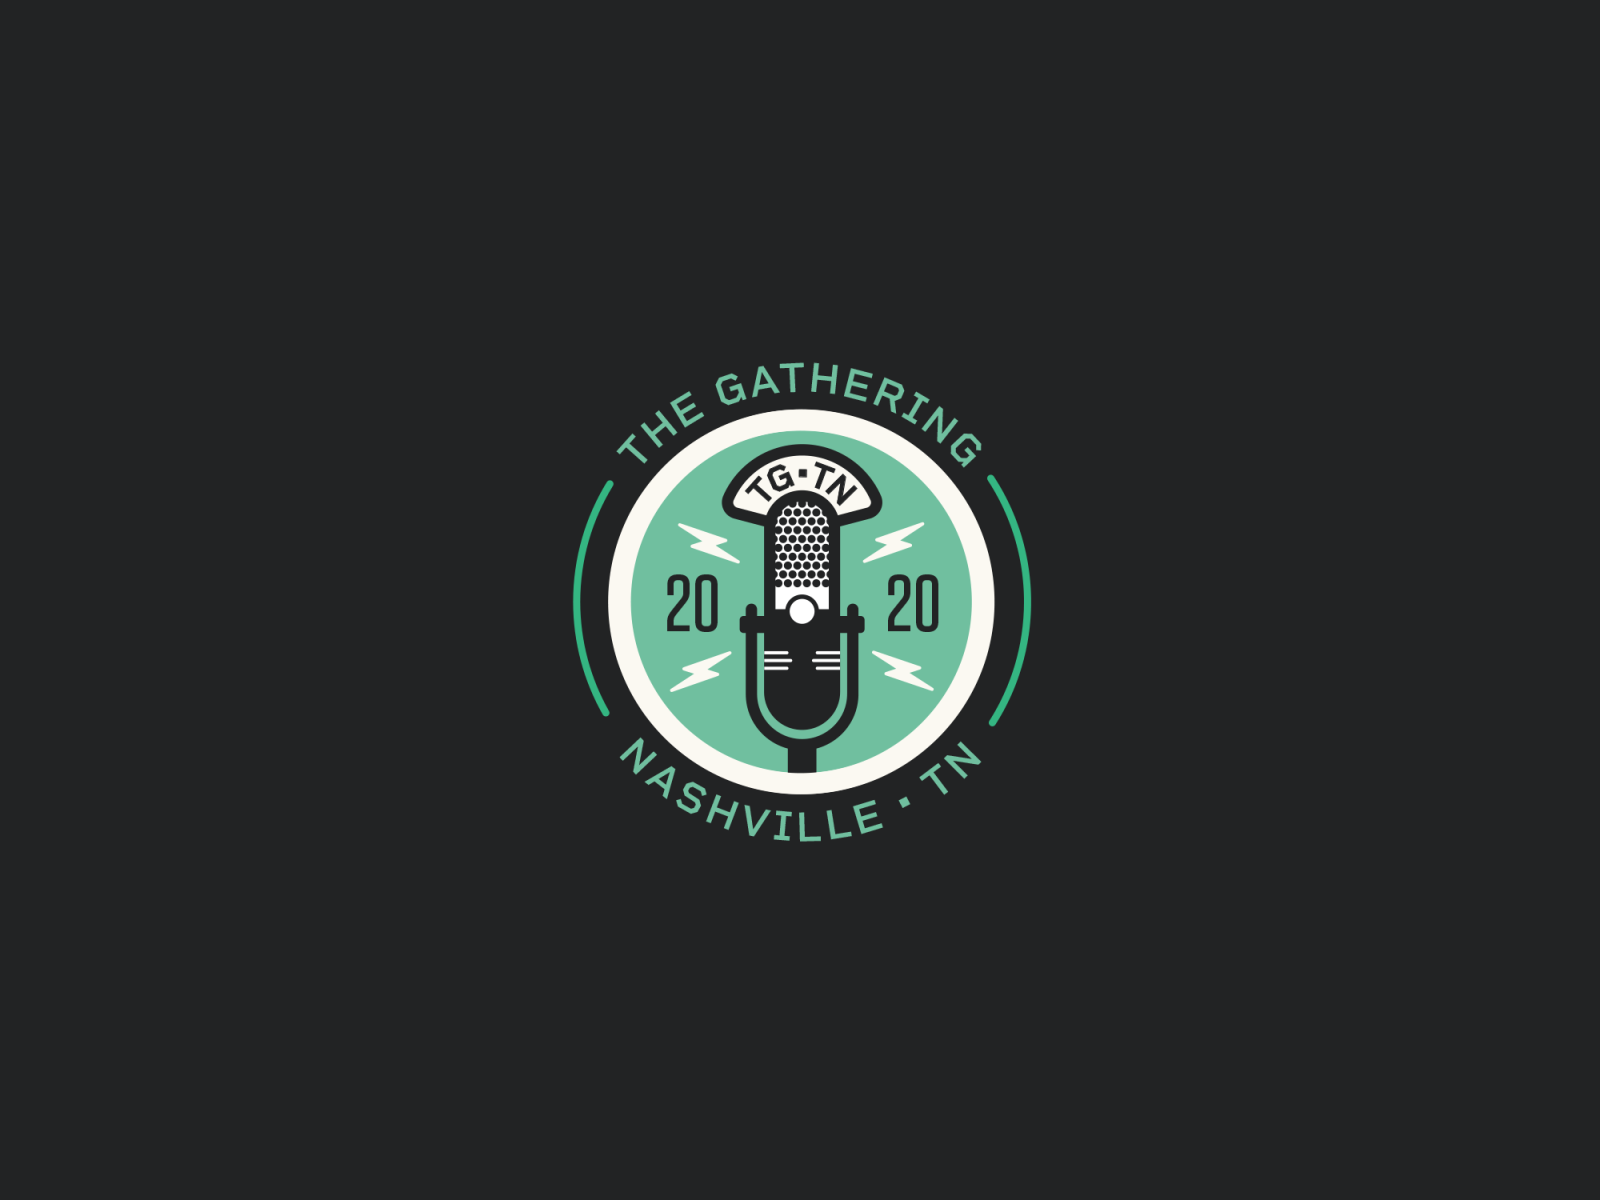 The Gathering Conference Nashville 2020 by Brad Wofford on Dribbble